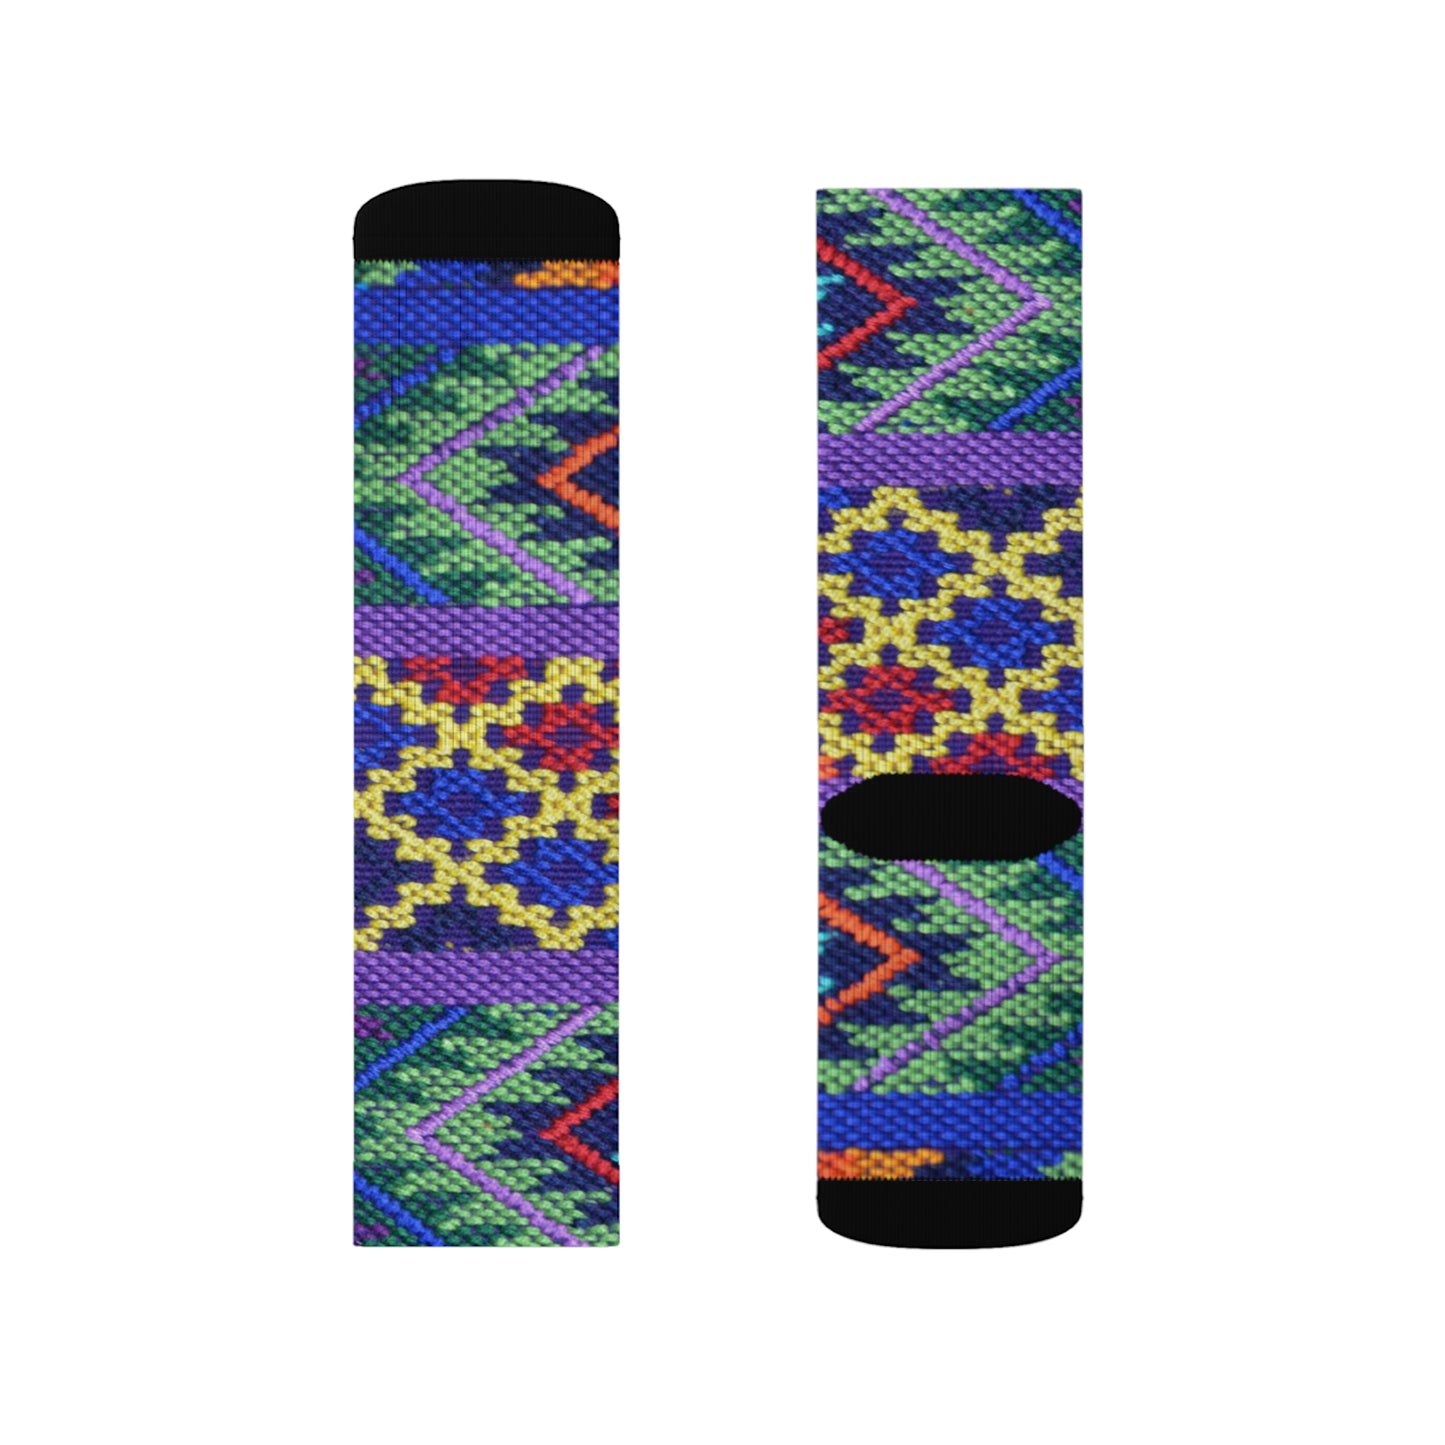 A Pack of Lies Sublimation Socks